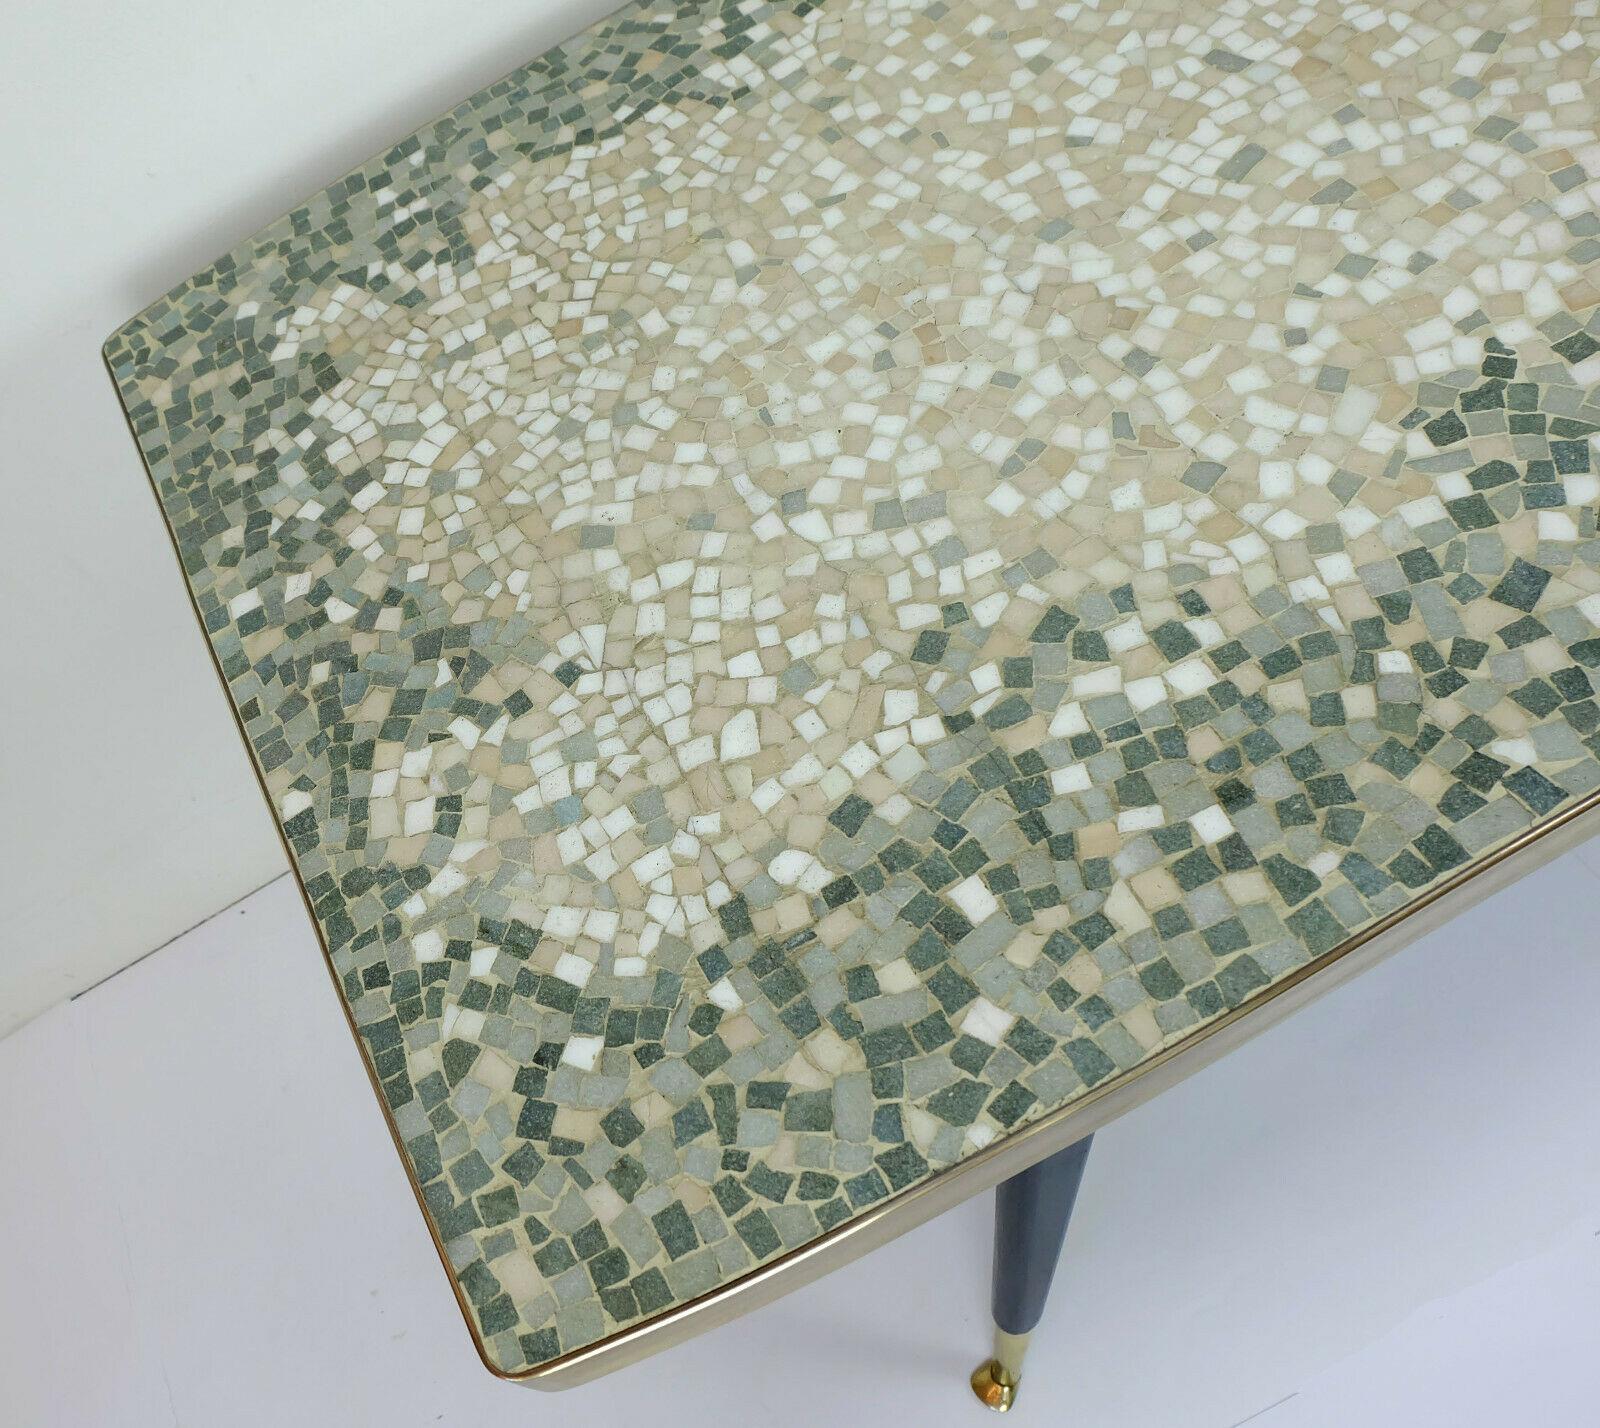 Glass 1950s Coffee Table Mid-Century Mosaic Mueller-Oerlinghausen Mosaic Table